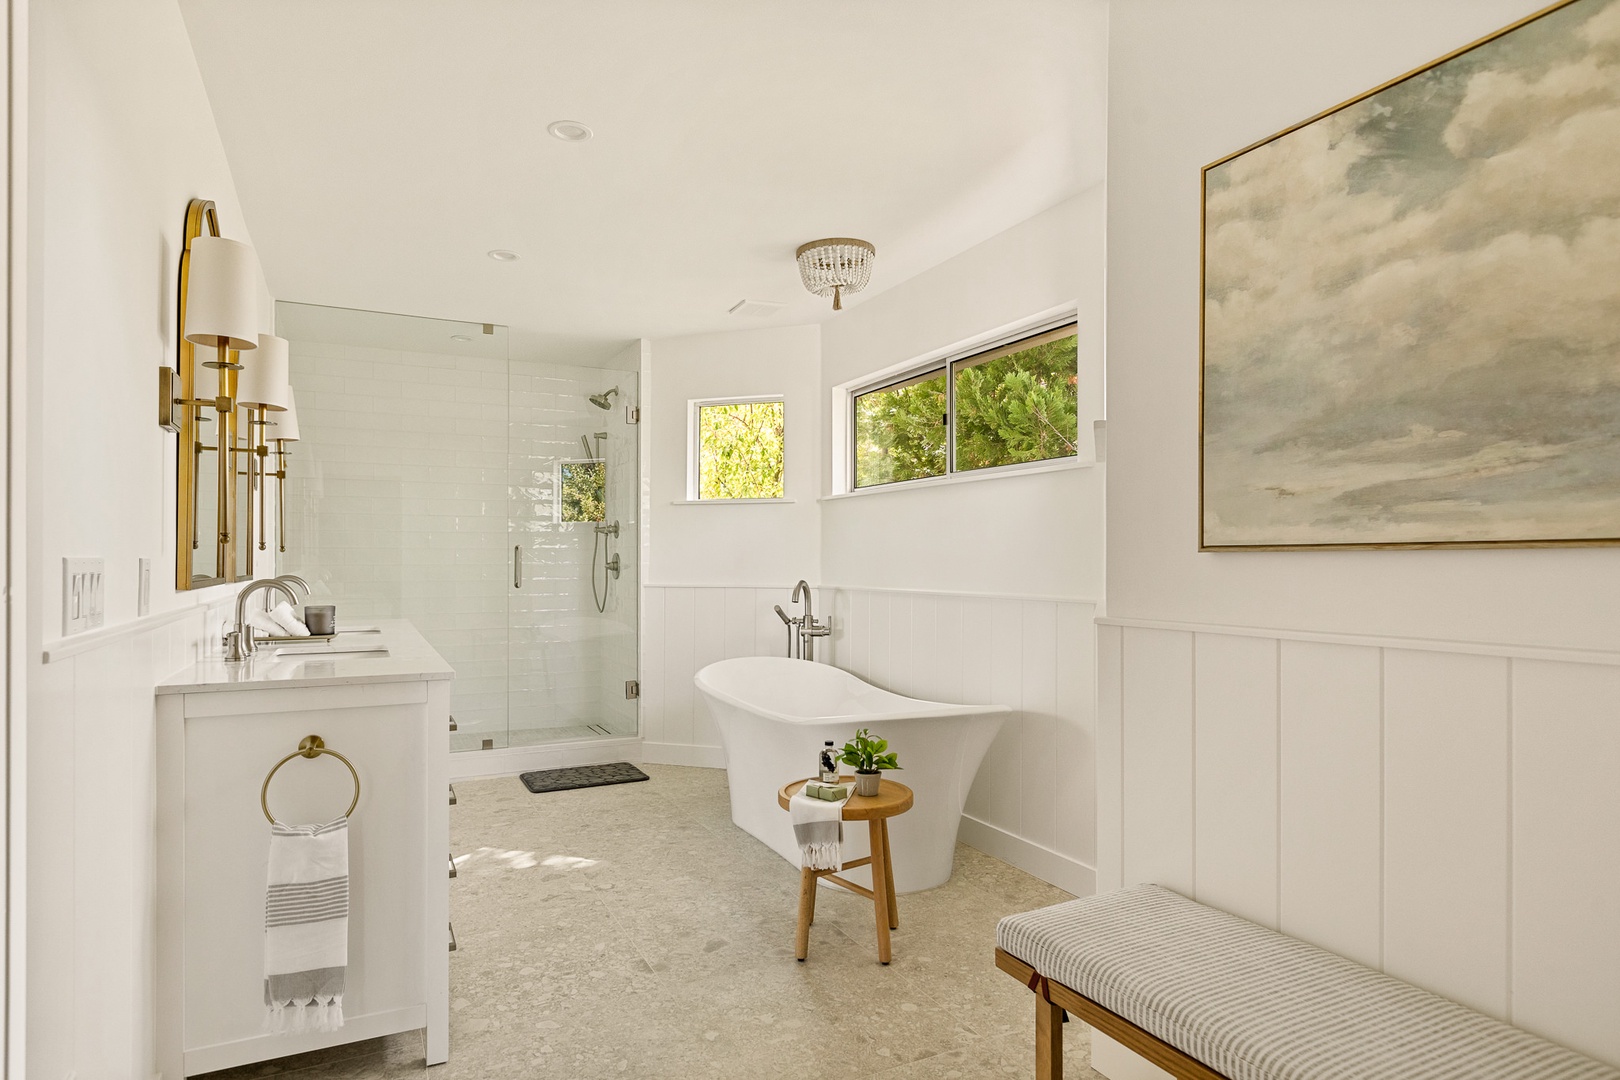 Bathroom #1 Unwind in this spa-like bathroom with steam shower, bench seating, and garden tub